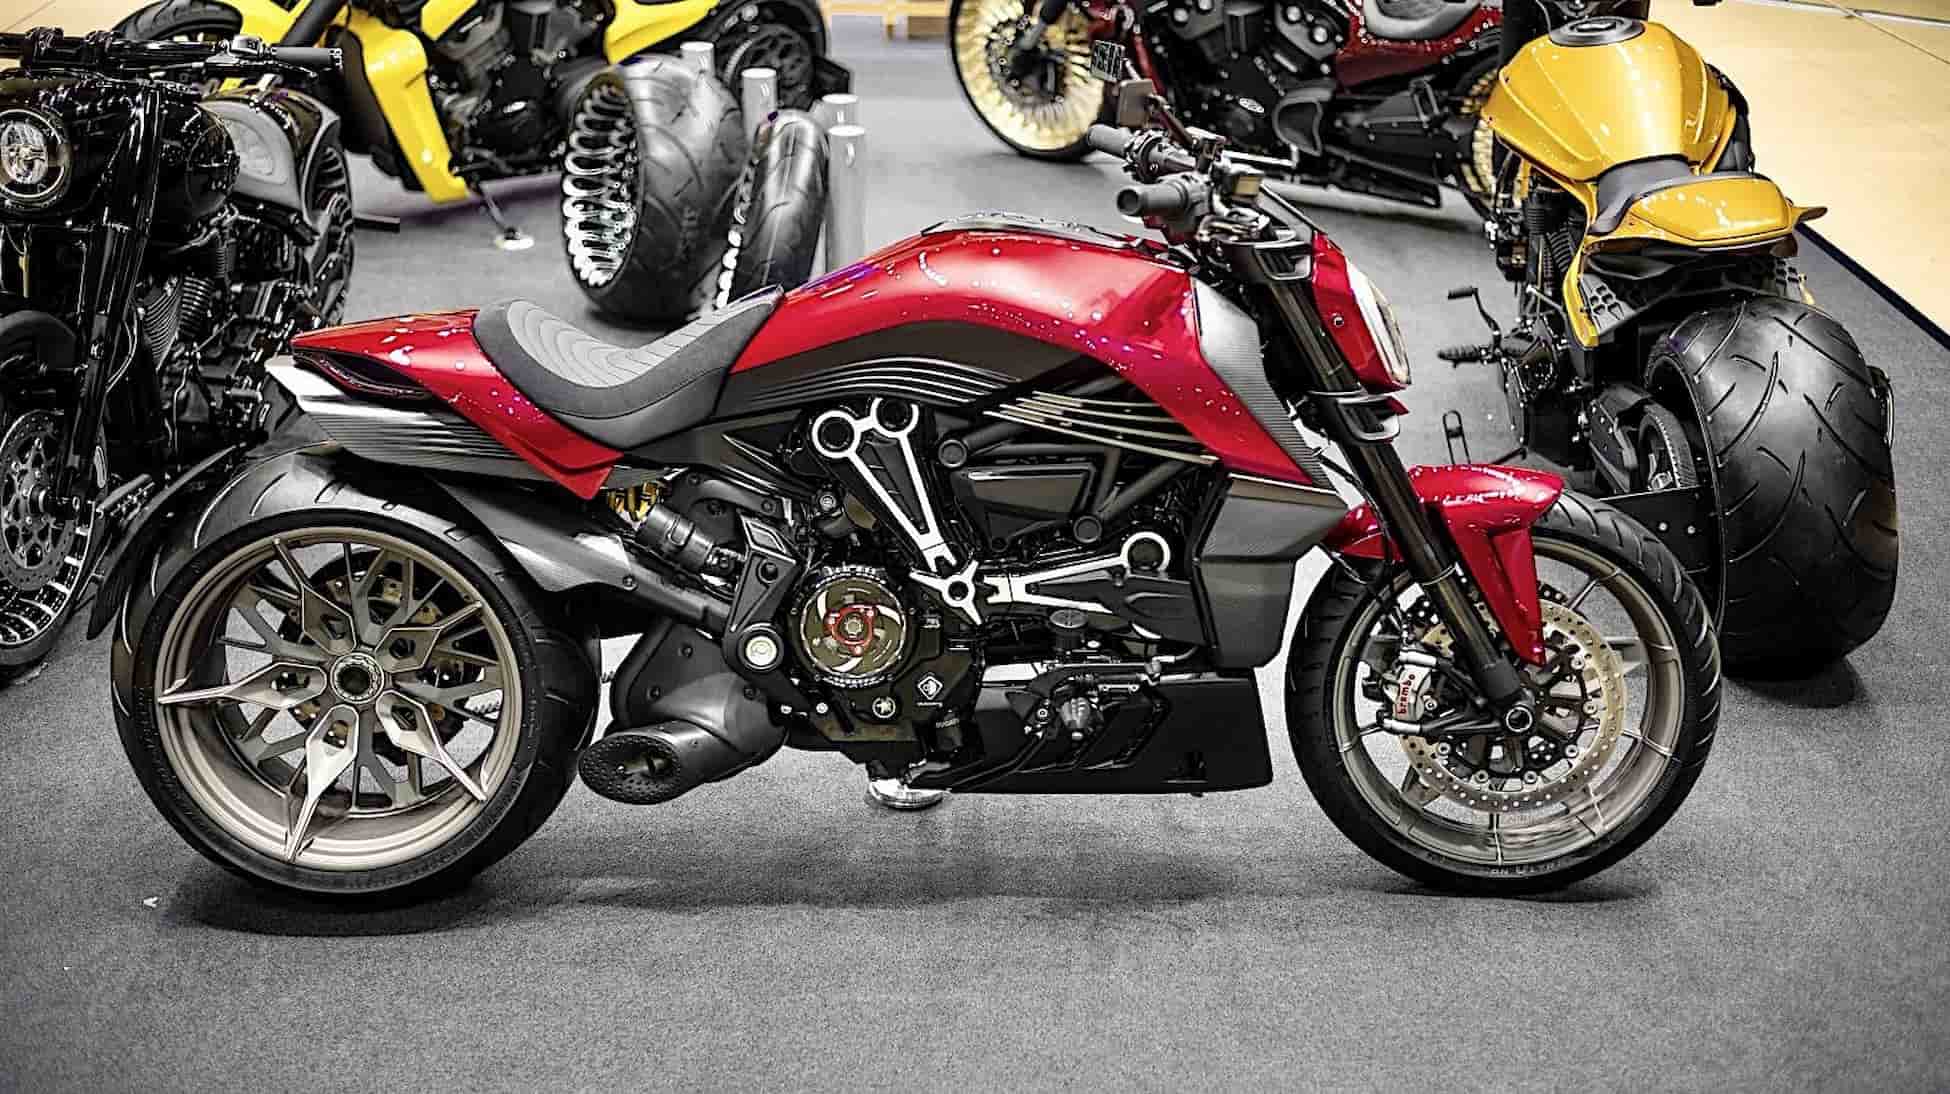 russians used to mold harley davidsons turn ducati xdiavel into some kind of beast 10